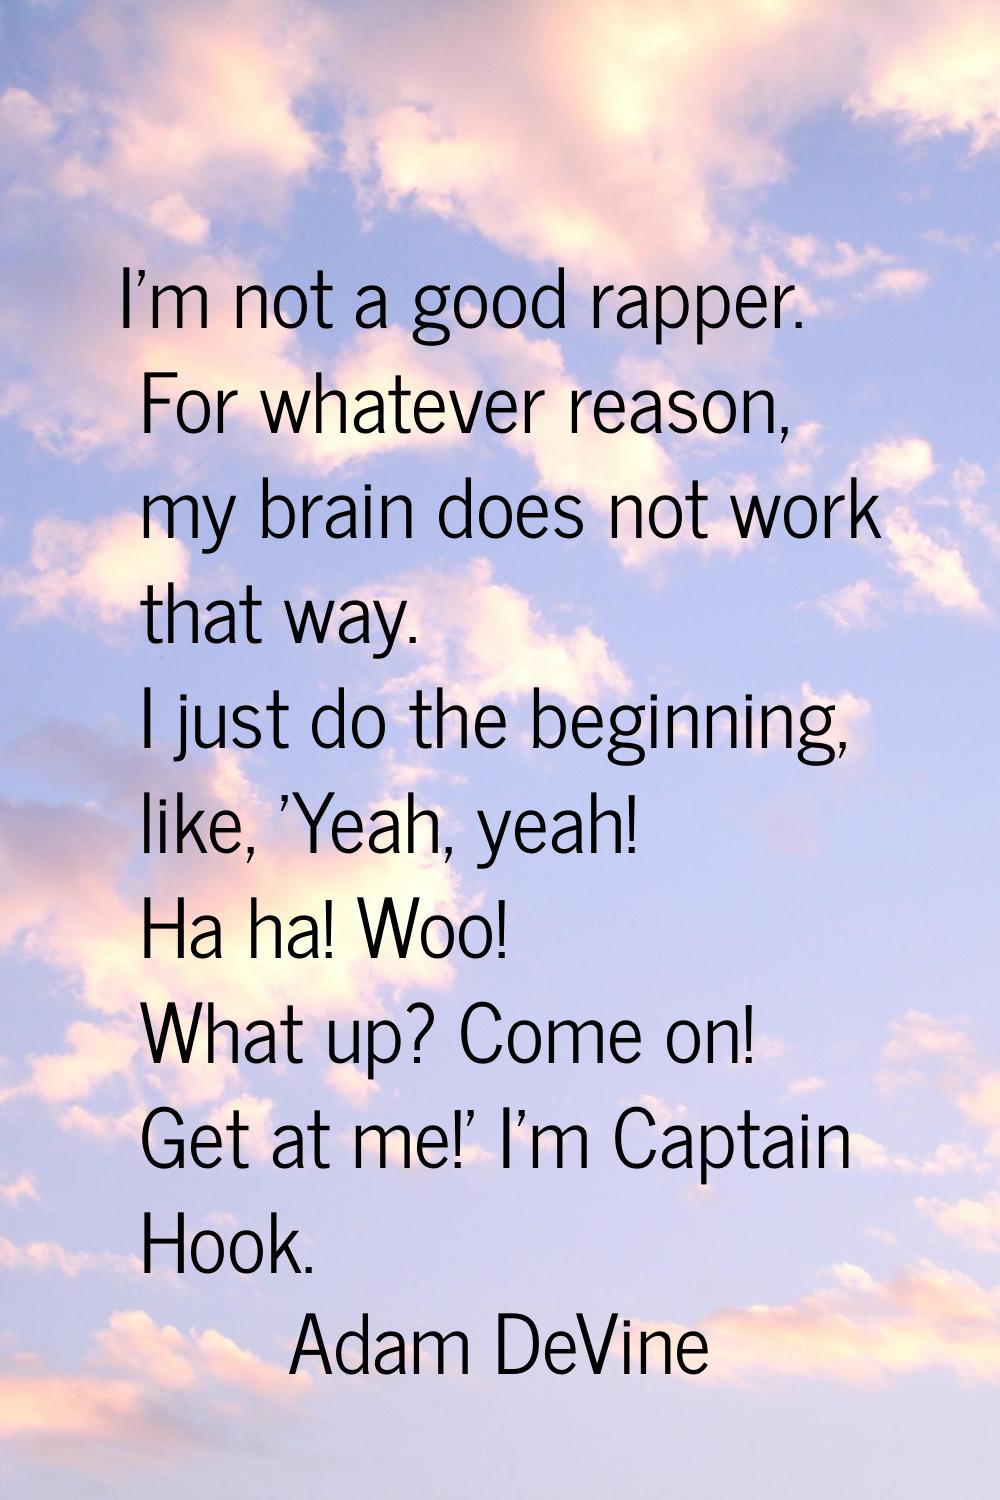 I'm not a good rapper. For whatever reason, my brain does not work that way. I just do the beginnin